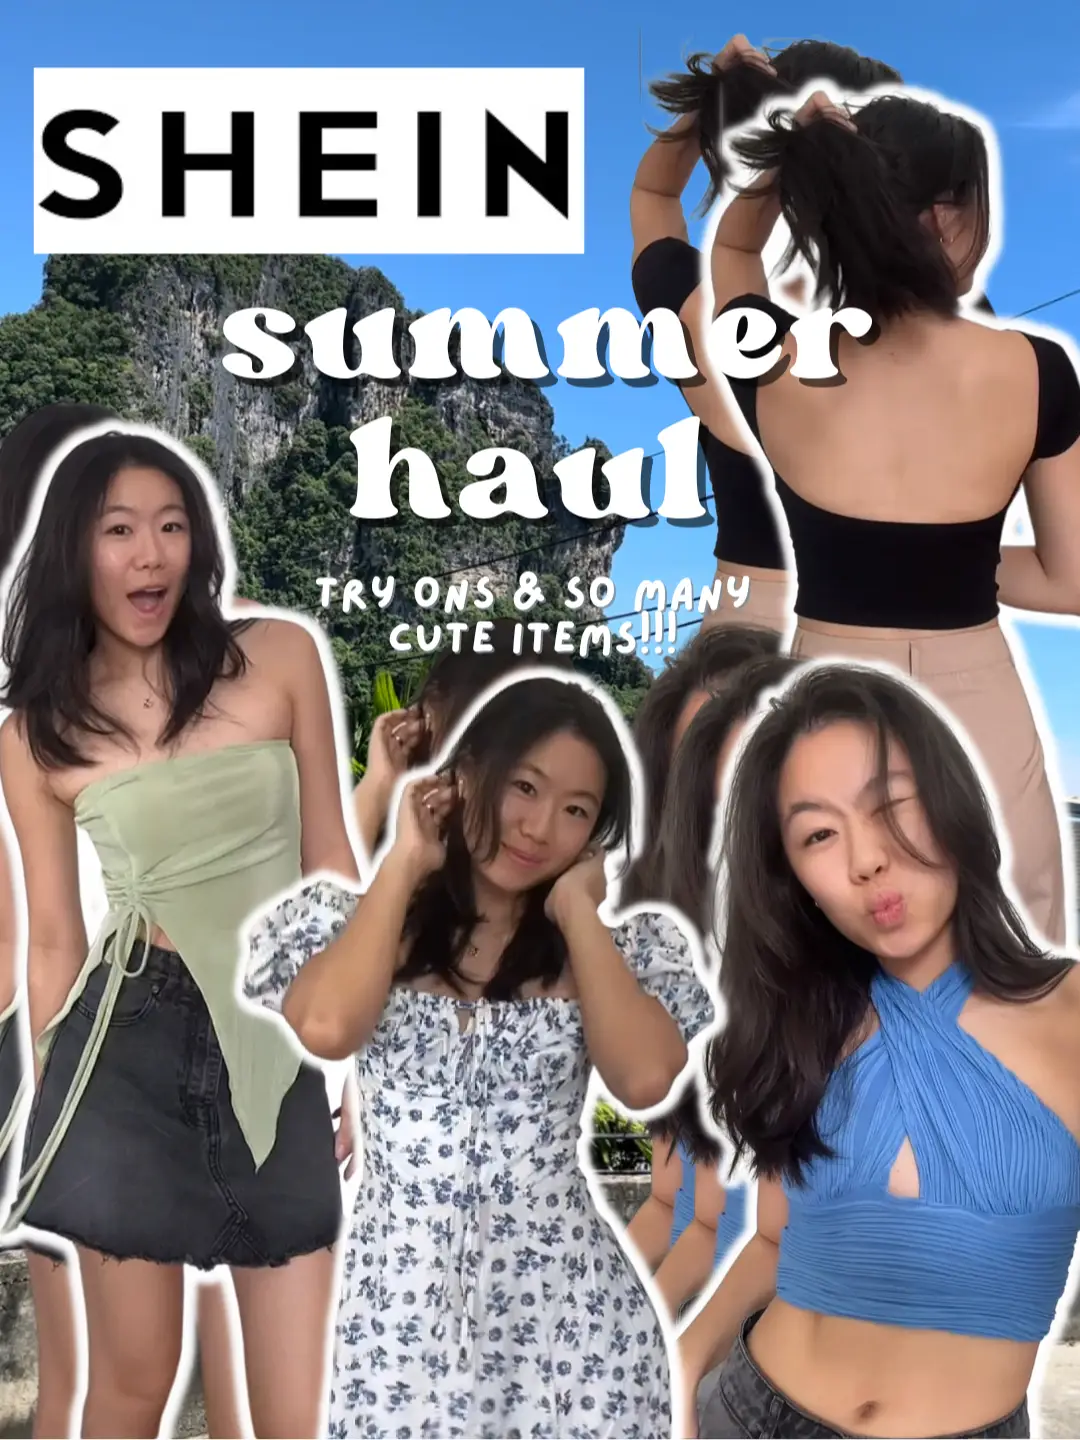 SHEIN HAUL🛍️, Gallery posted by lauren🪷